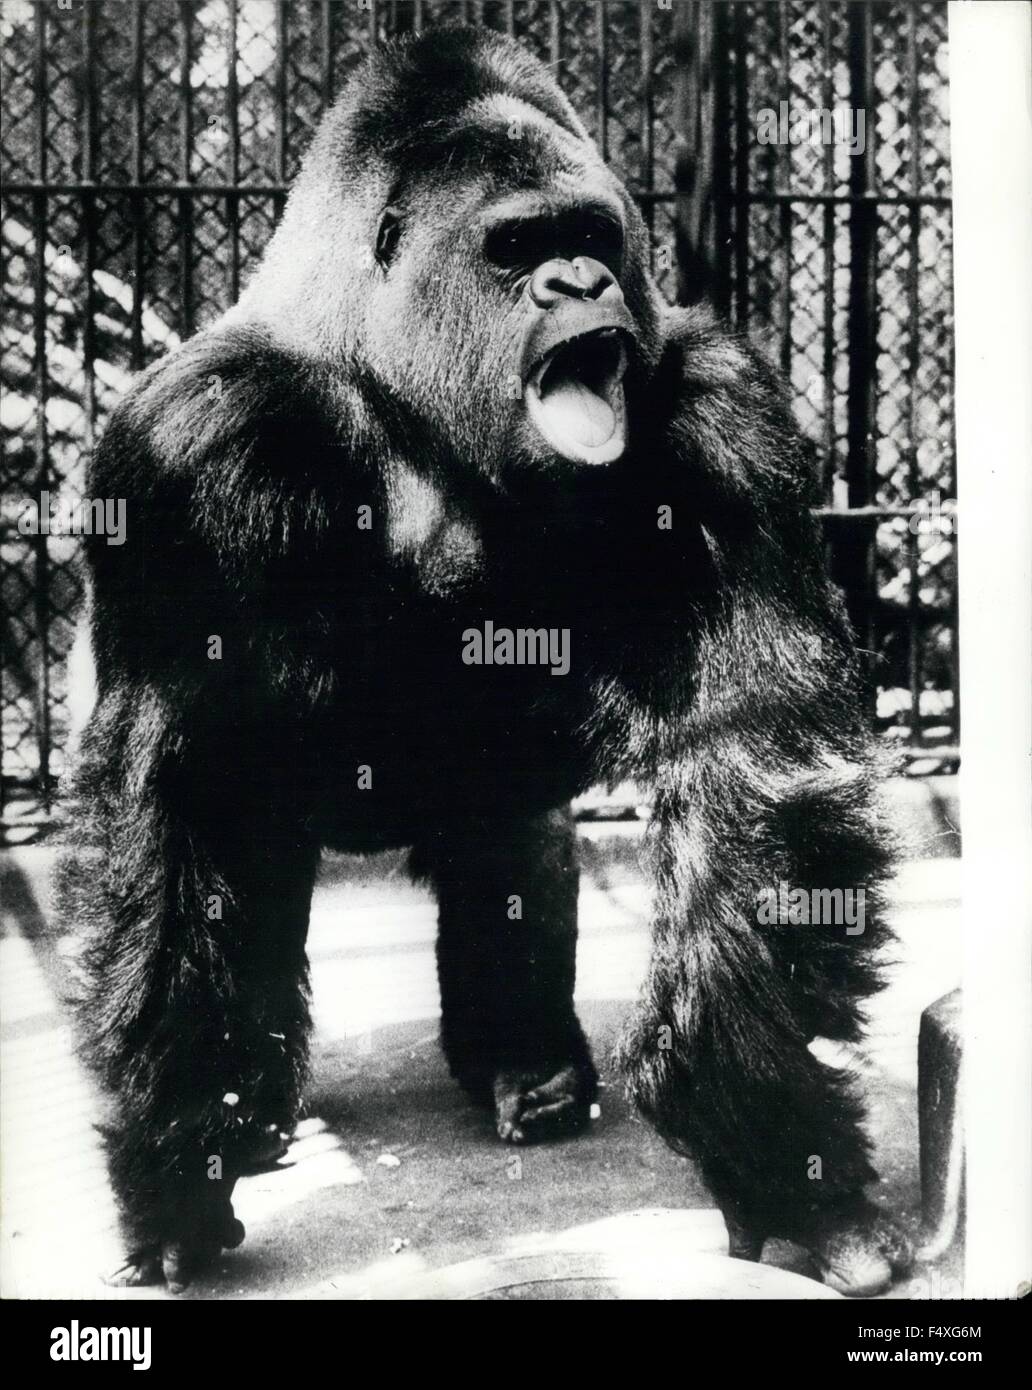 1968 - Gorilla He's Not As Bad As He Looks: This 500Lb Gorilla From The Stockholm Zoo Might Come At You Letting Out A Tremendous Roar, And Beating His Chest With Clenched Fists, All This Might Make You Feel Pale, But It's Mostly To Boost His Own Morale, Rather Than Any Real Aggression Towards You. © Keystone Pictures USA/ZUMAPRESS.com/Alamy Live News Stock Photo